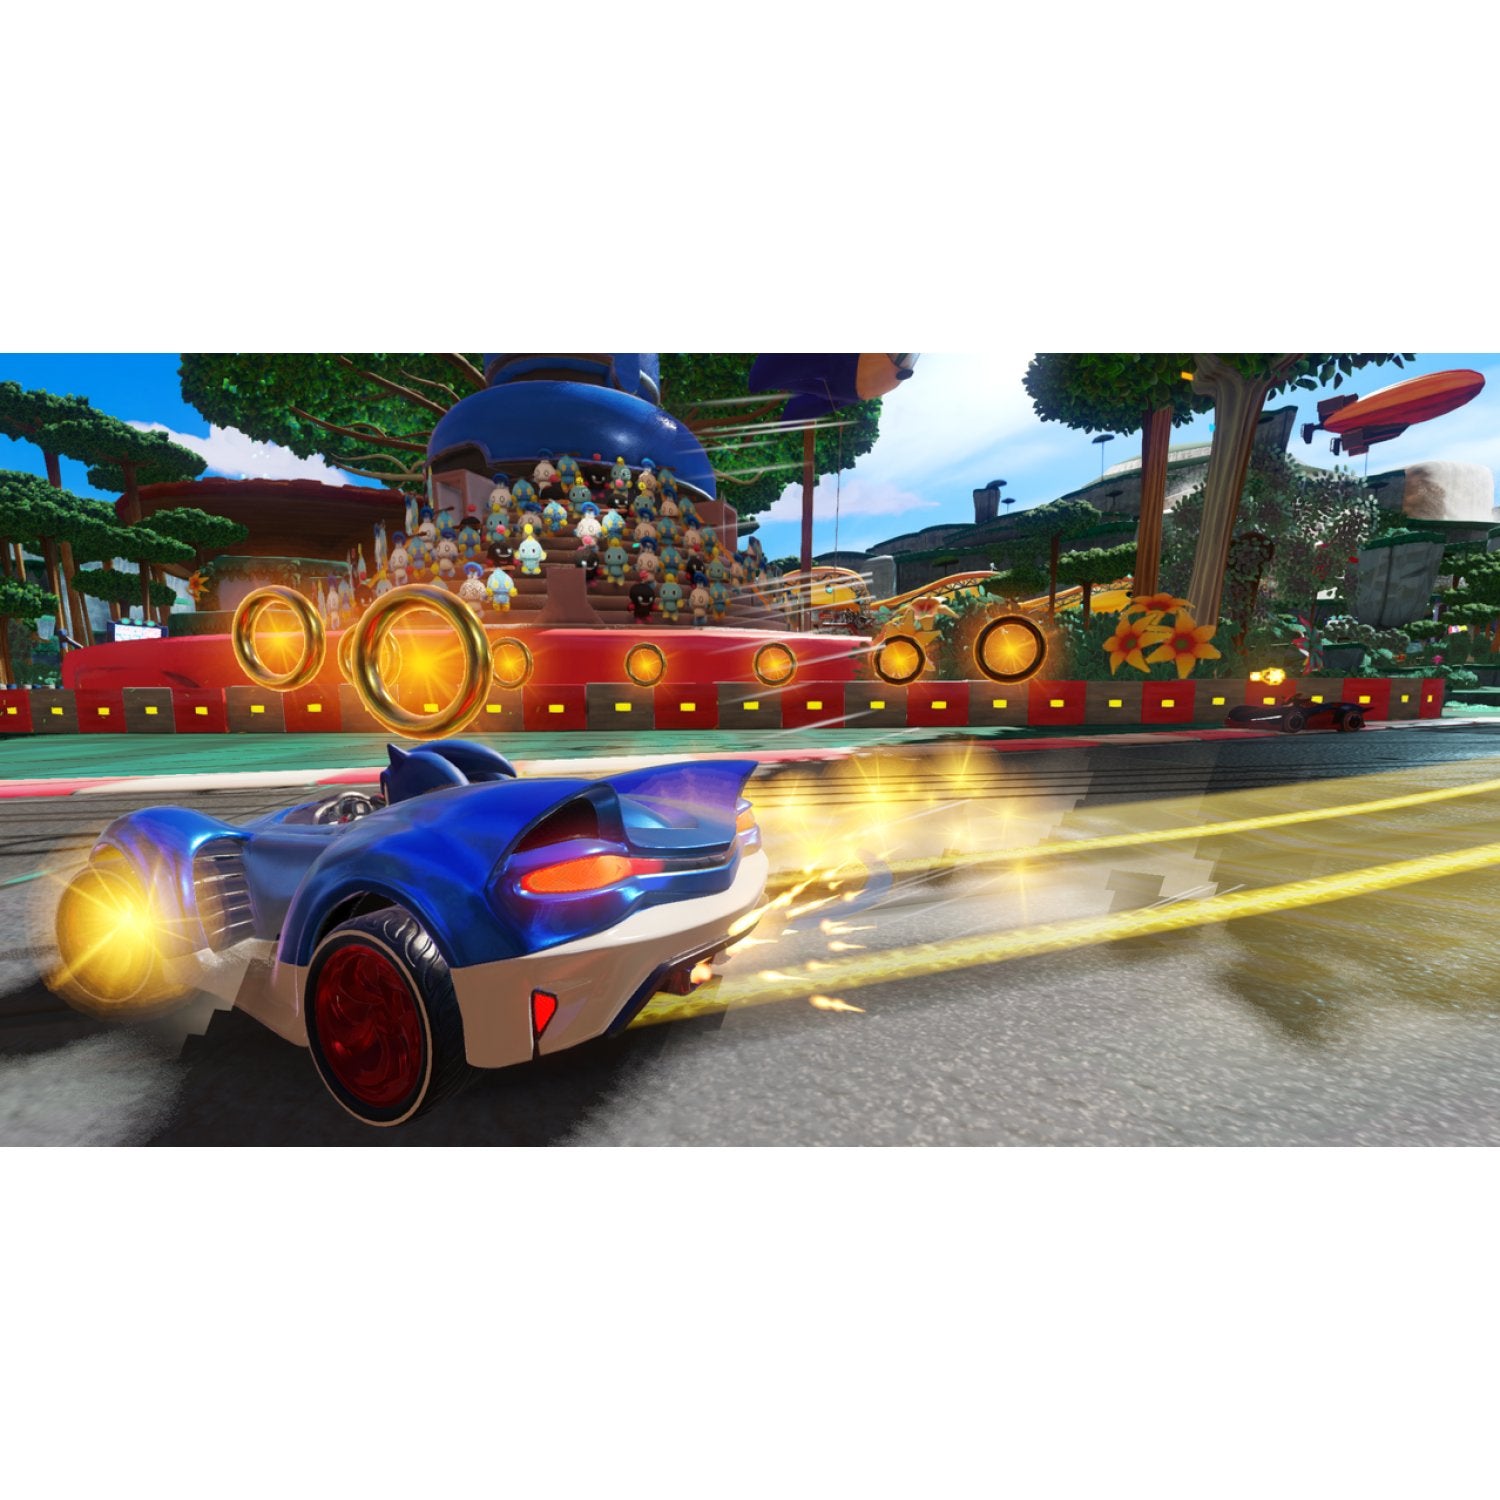 Sonic Mania + Team Sonic Racing Double Pack (2 Games in 1)(Nintendo Switch)  NEW